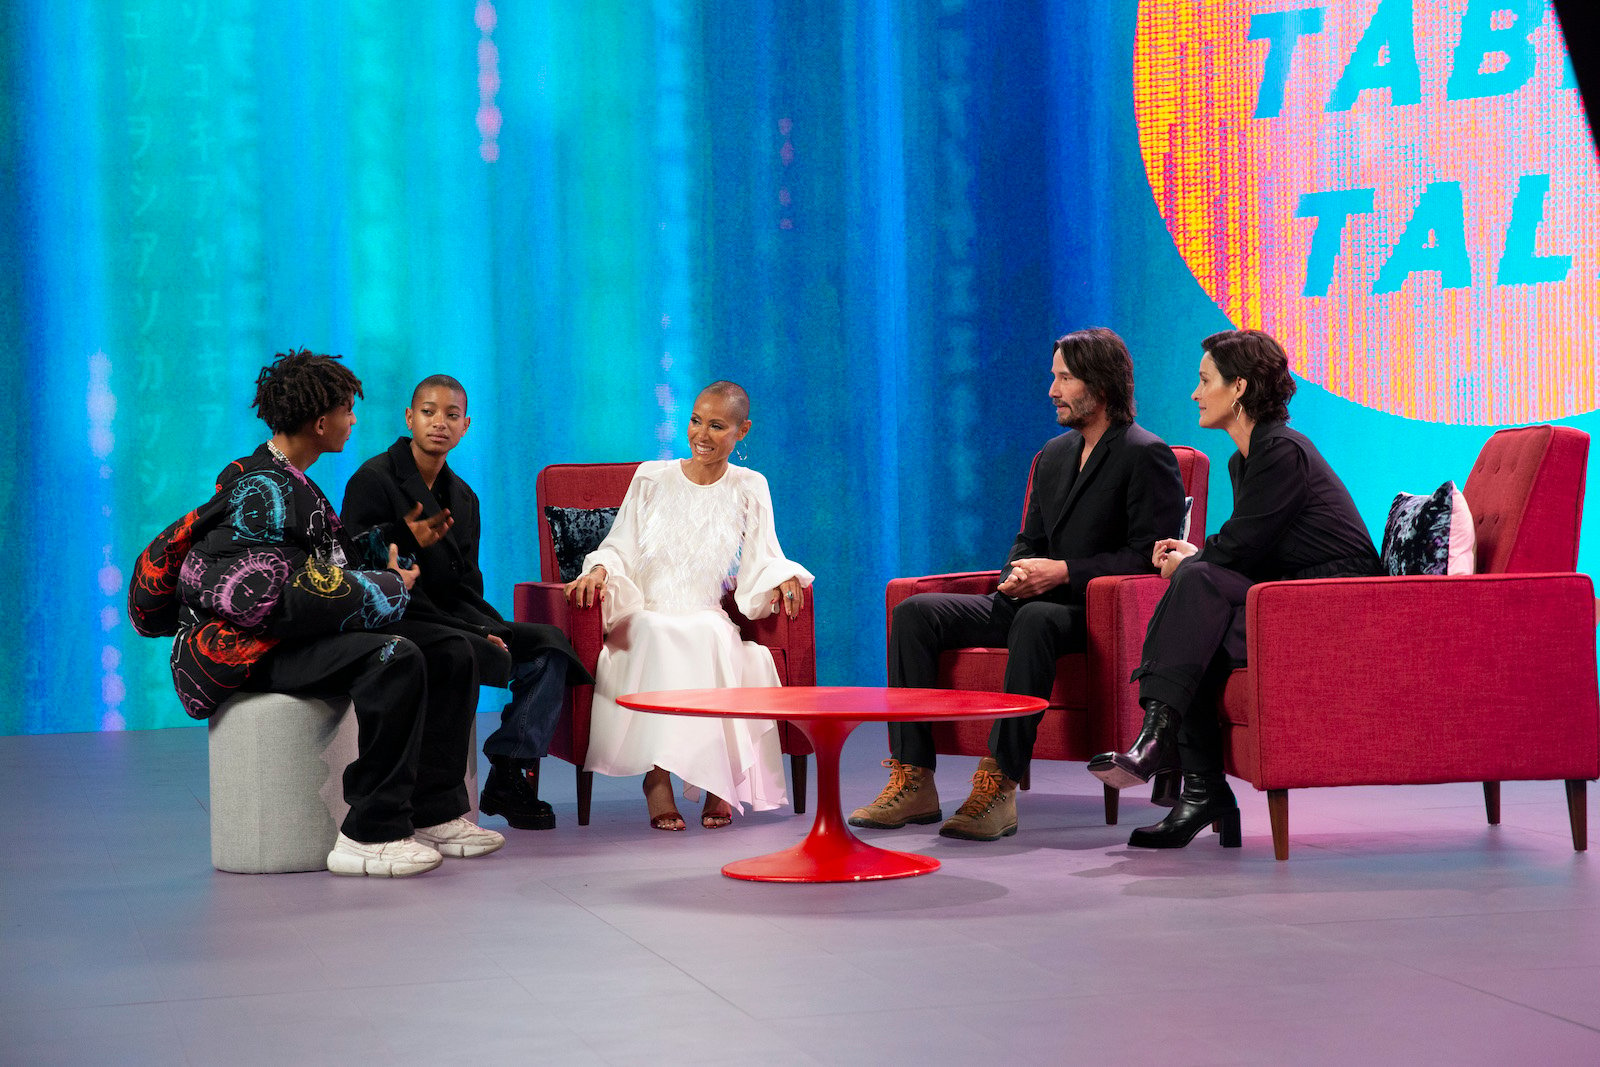 Keanu Reeves, Carrie-Ann Moss, Jada Pinkett Smith, Willow Smith, and Jaden Smith during Red Table Talk discussion